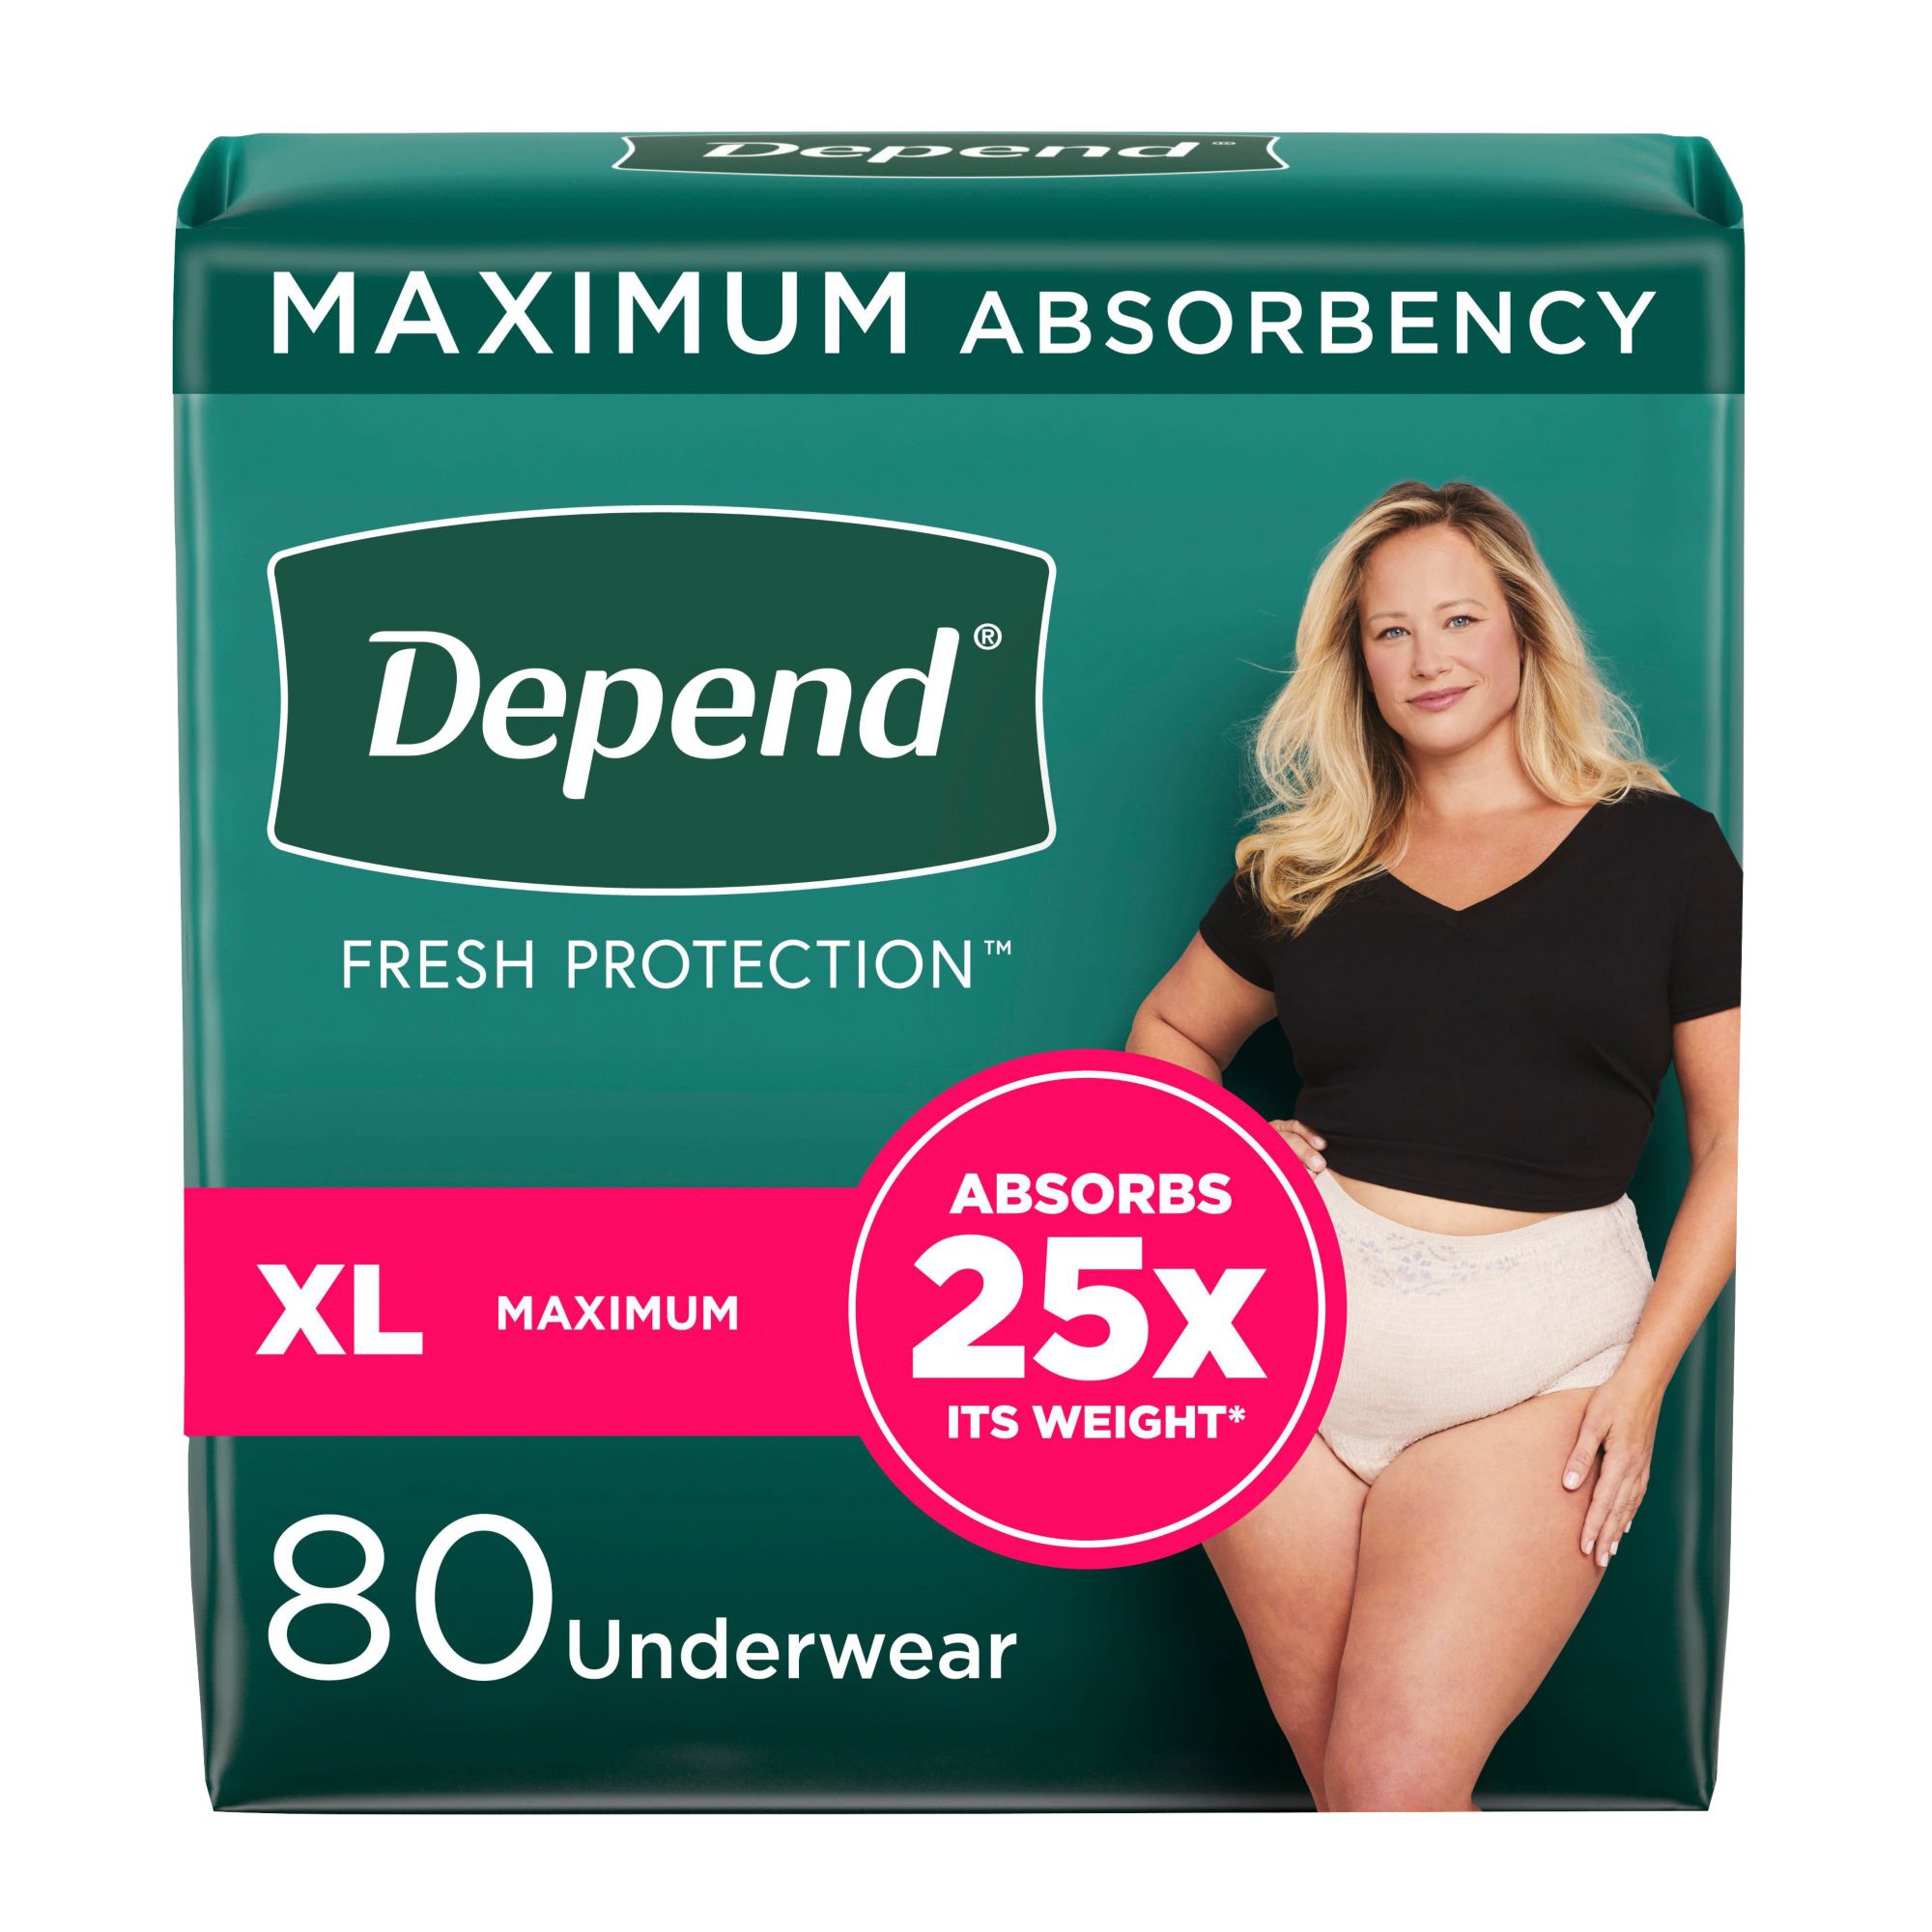 Depend Real Fit Super Underwear For Women X Large Waist 122